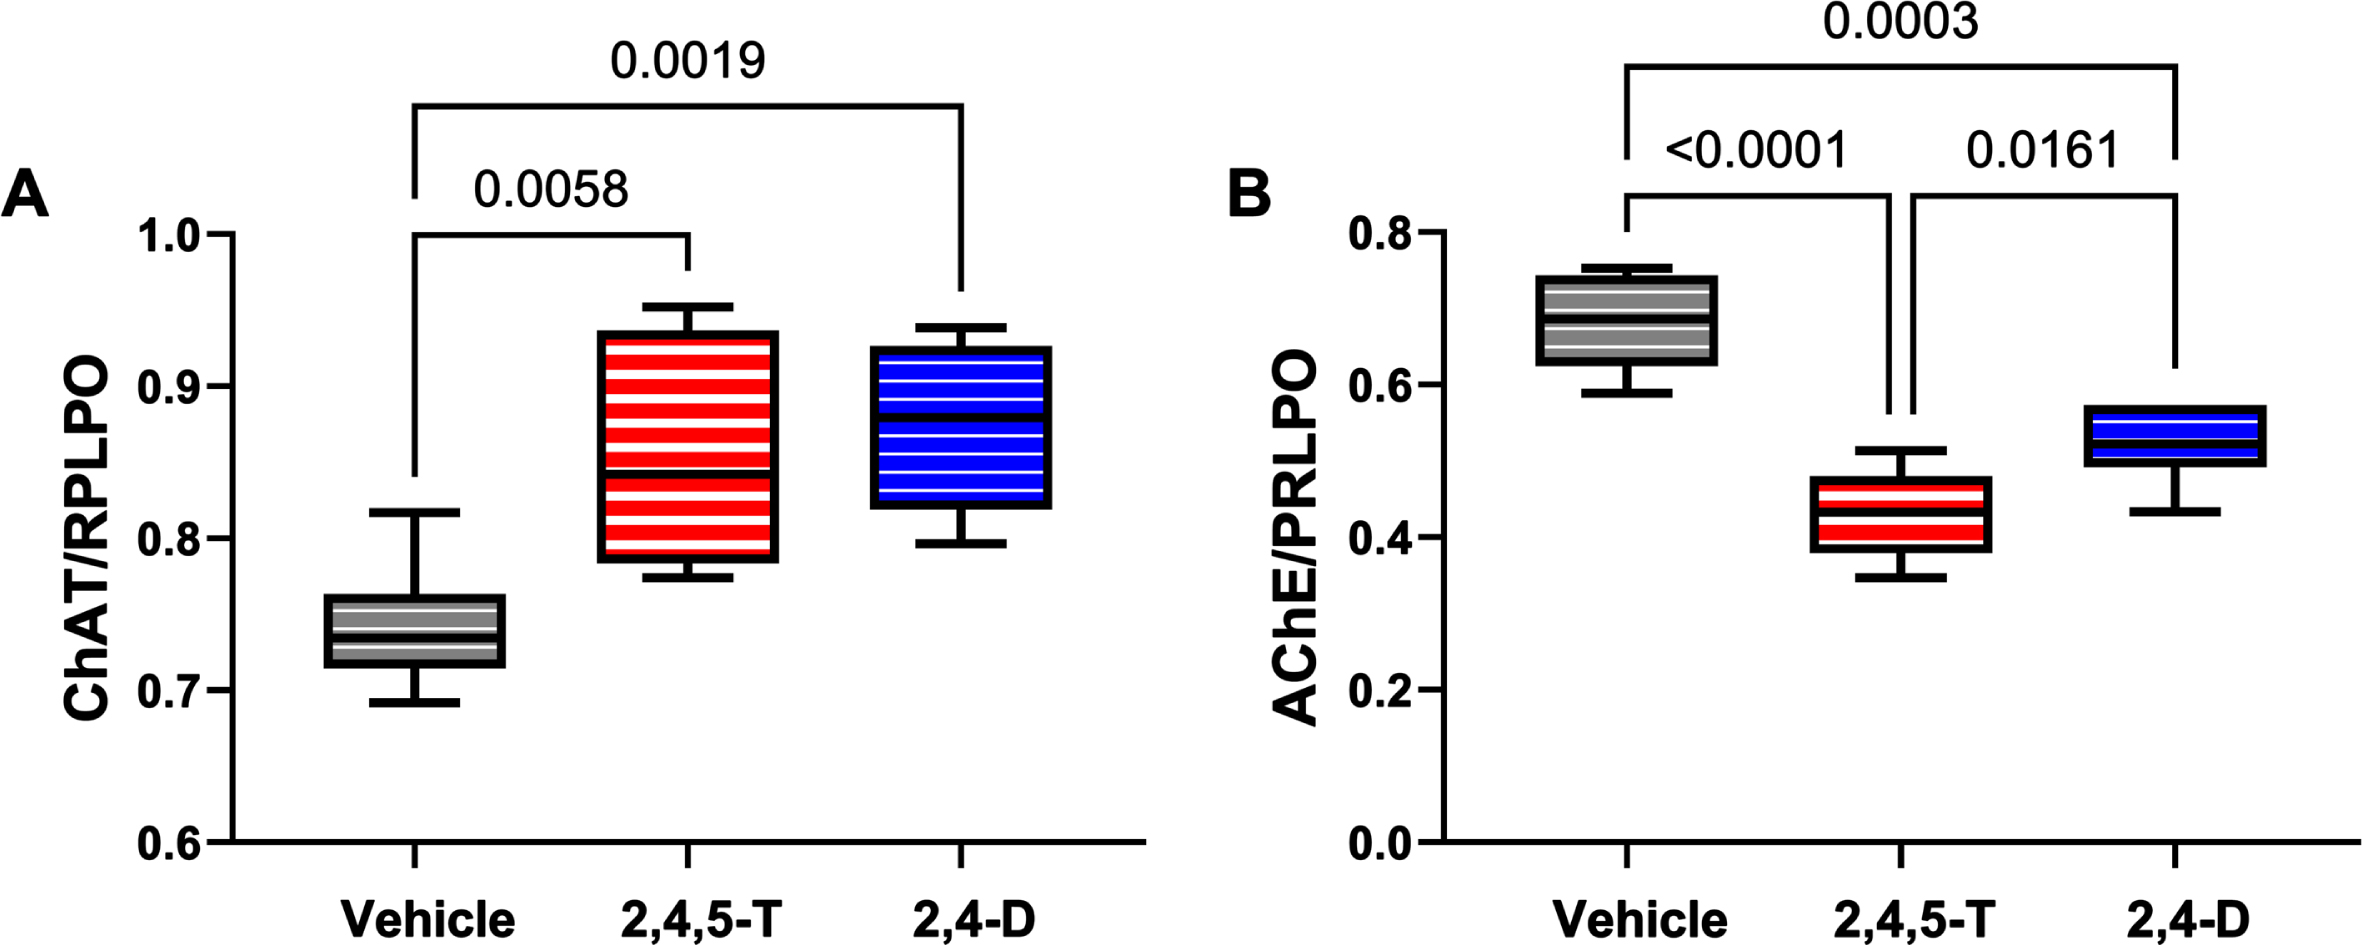 Effects of Agent Orange herbicidal toxin exposures on cholinergic enzyme protein expression. Human PNET2 cells treated for 48 h with Vehicle, 250μg/ml 2,4,5-T or 250μg/ml 2,4-D were analyzed for (A) ChAT and (B) AChE immunoreactivity by duplex ELISA with results normalized to large acidic ribosomal protein (RPLPO). Results were analyzed by one-way ANOVA (Table 5). Significant differences (p < 0.05) by post hoc Tukey tests are indicated. Each group included 6 replicate cultures. 2,4,5-T, 2,4,5-trichlorophenoxyacetic acid; 2,4-D, 2,4-dichlorophenoxyacetic acid; ChAT, choline acetyltransferase; AChE, acetylcholinesterase.